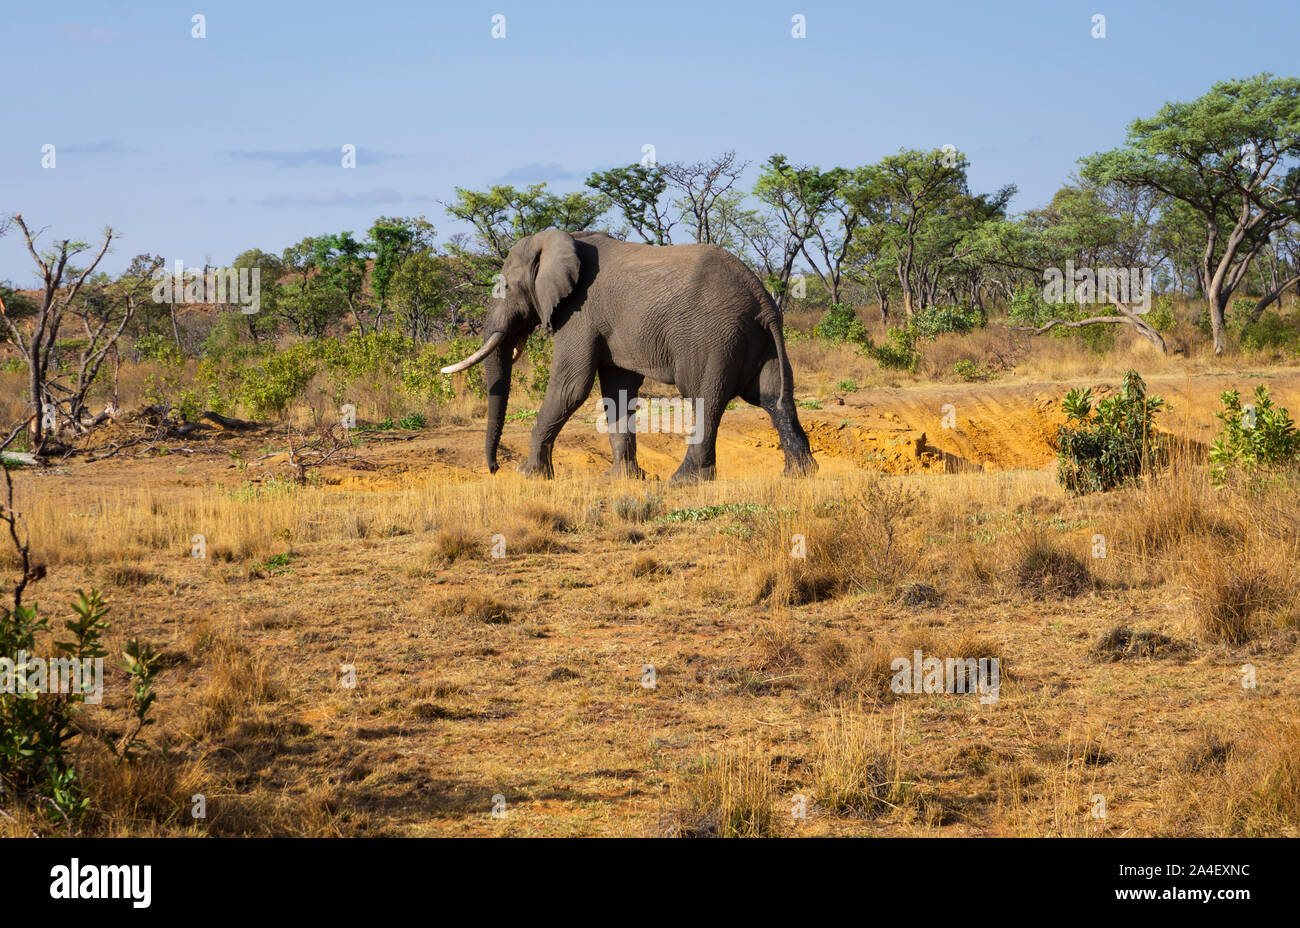 A male African Elephant (Loxodonta africana). Welgevonden Game Reserve, South Africa Stock Photo